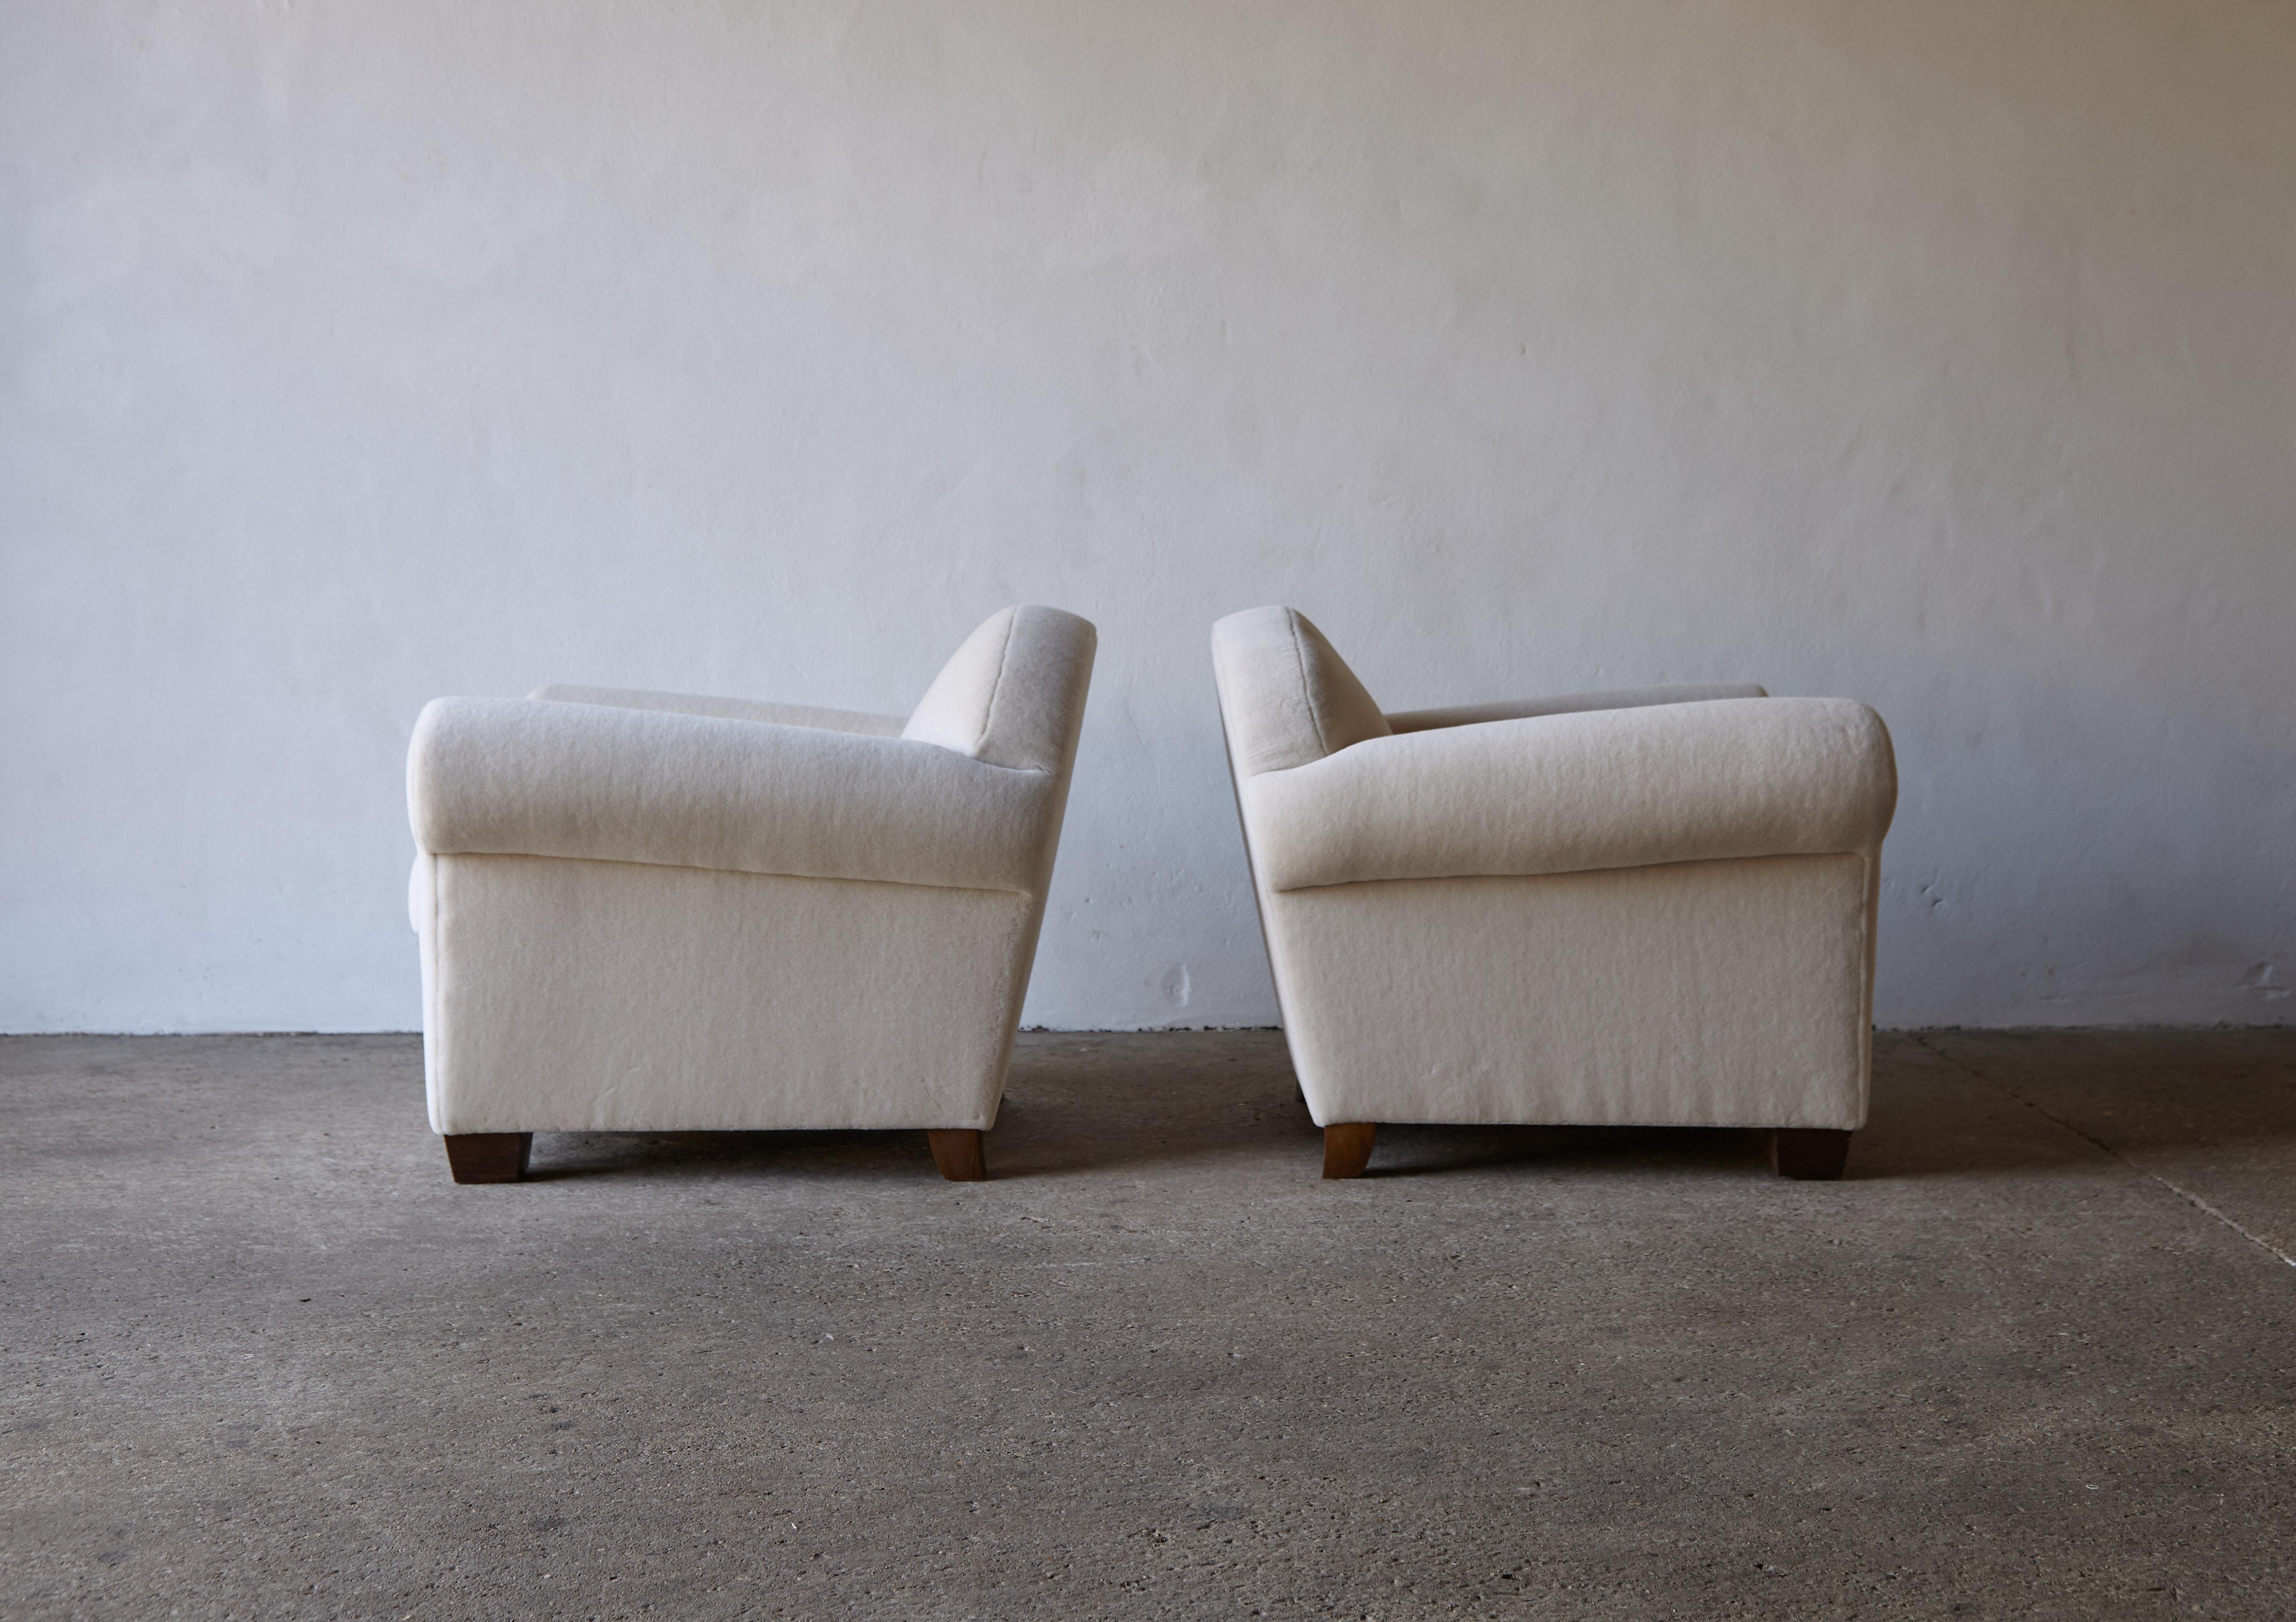 An elegant pair of modern armchair, upholstered in pure alpaca wool. High quality hand-made beech frames and newly upholstered in an off white premium 100% alpaca. Fast shipping worldwide.

